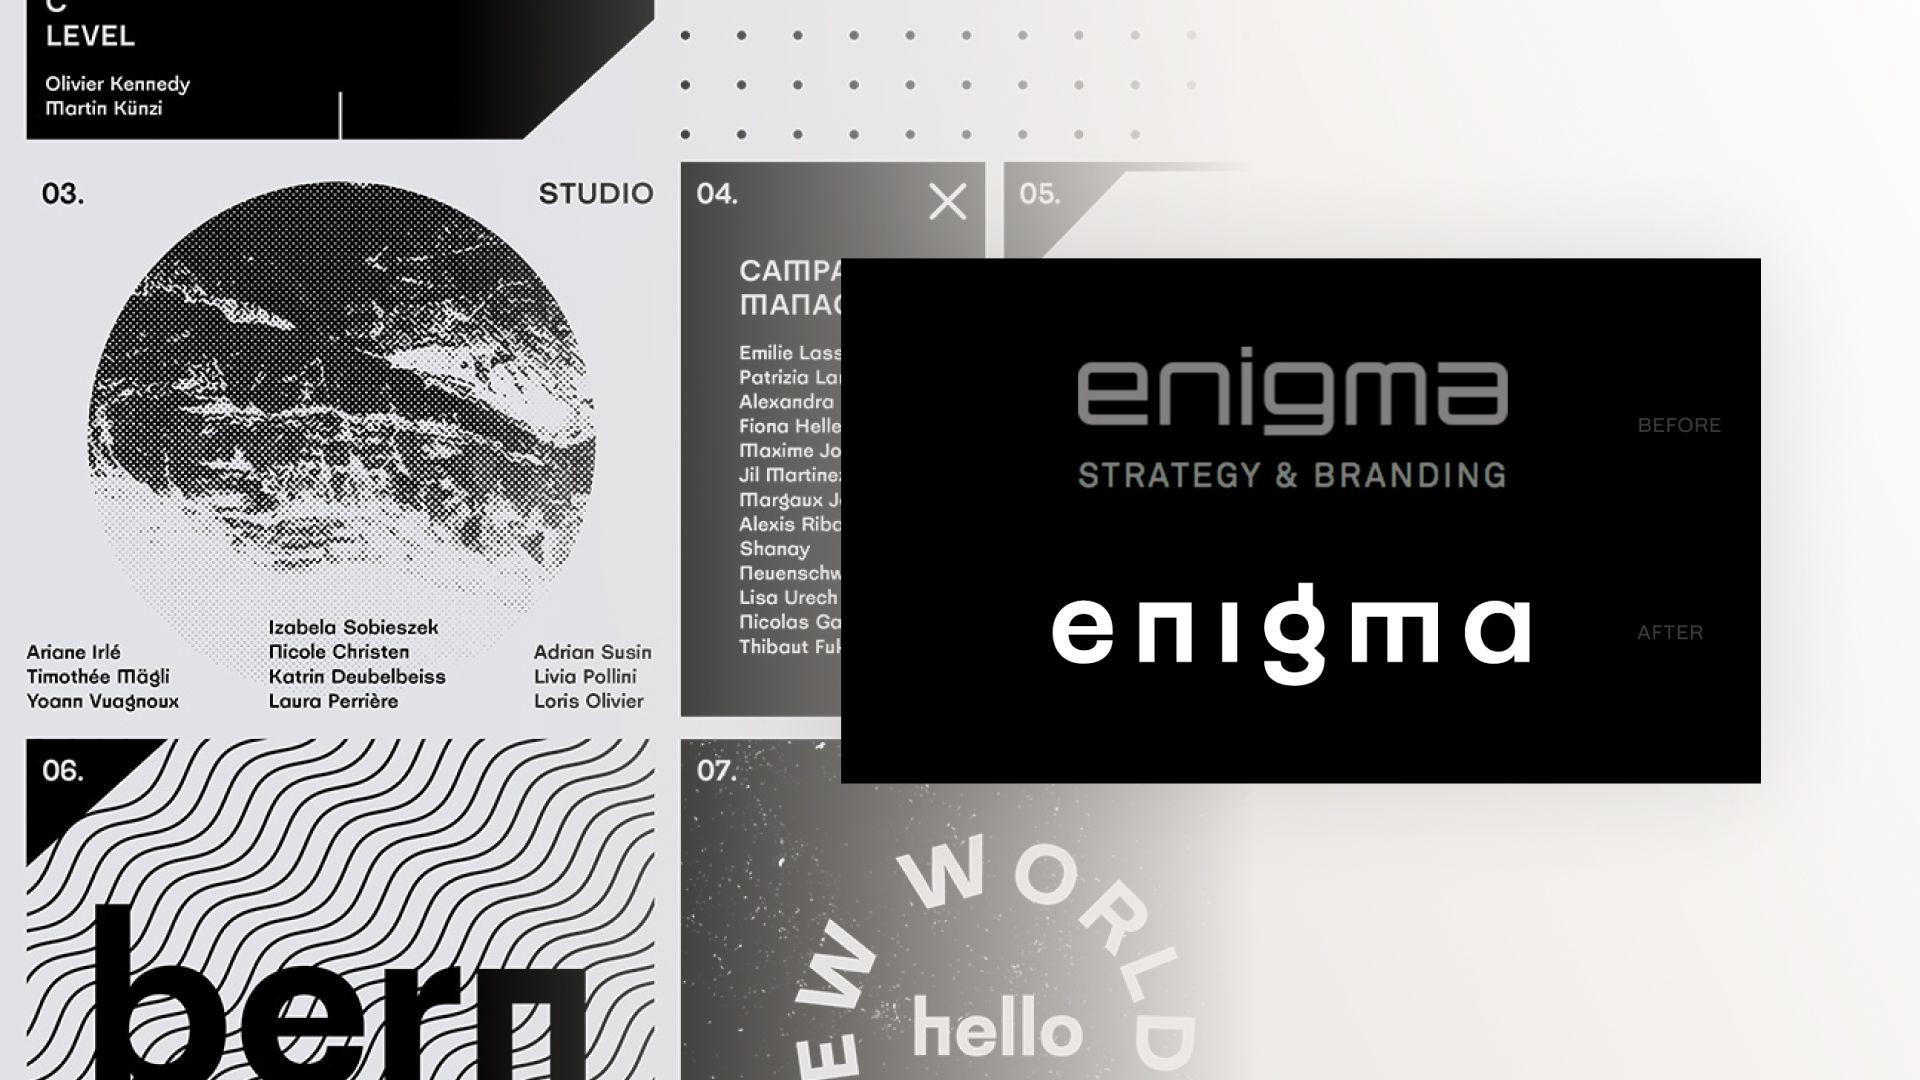 Image of the old and new logo of enigma 